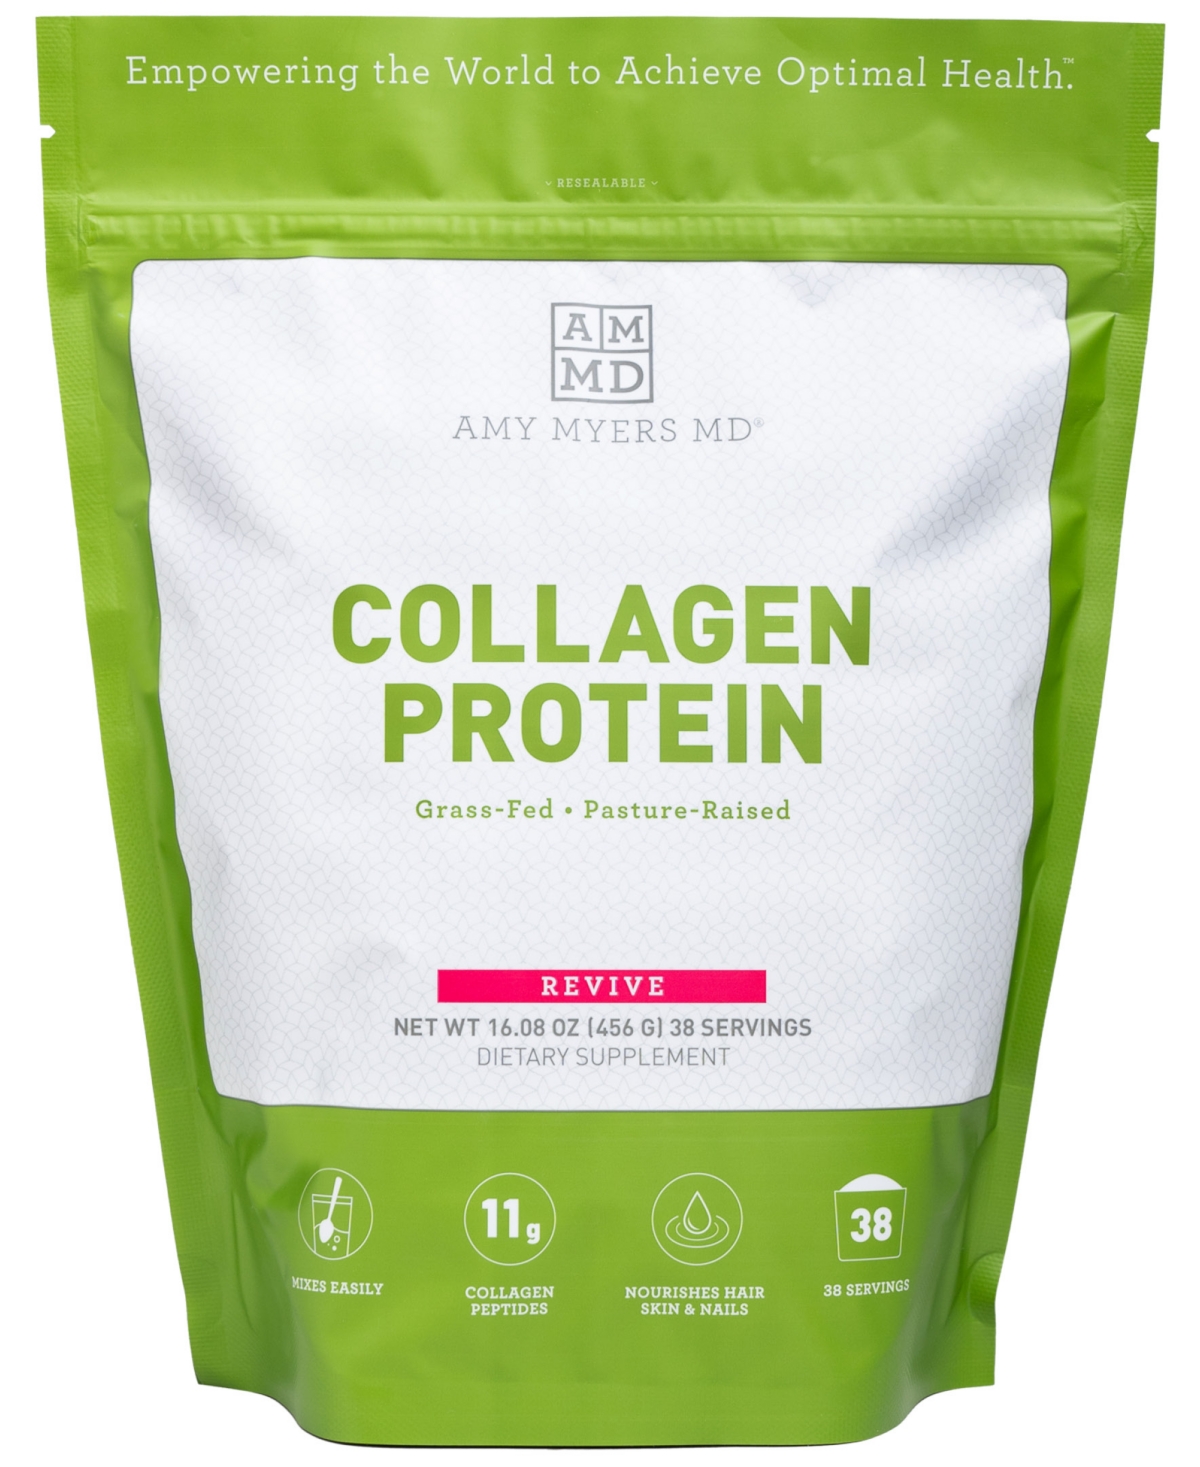 Amy Myers Md Collagen Protein 38 Servings In Green